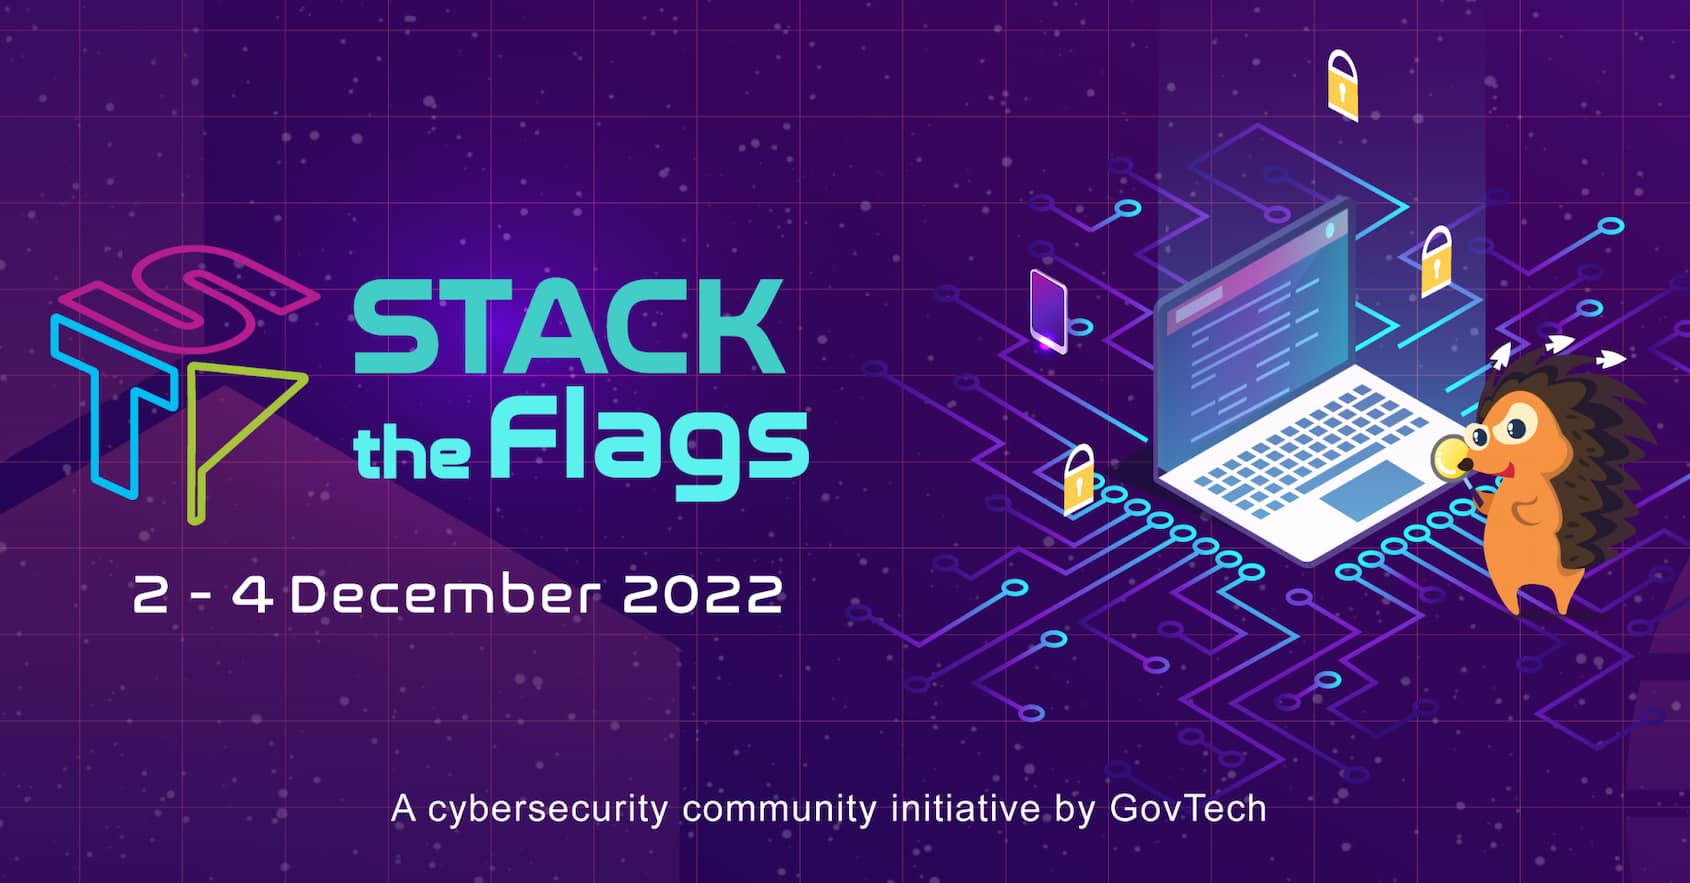 STACK the Flags event by GovTech